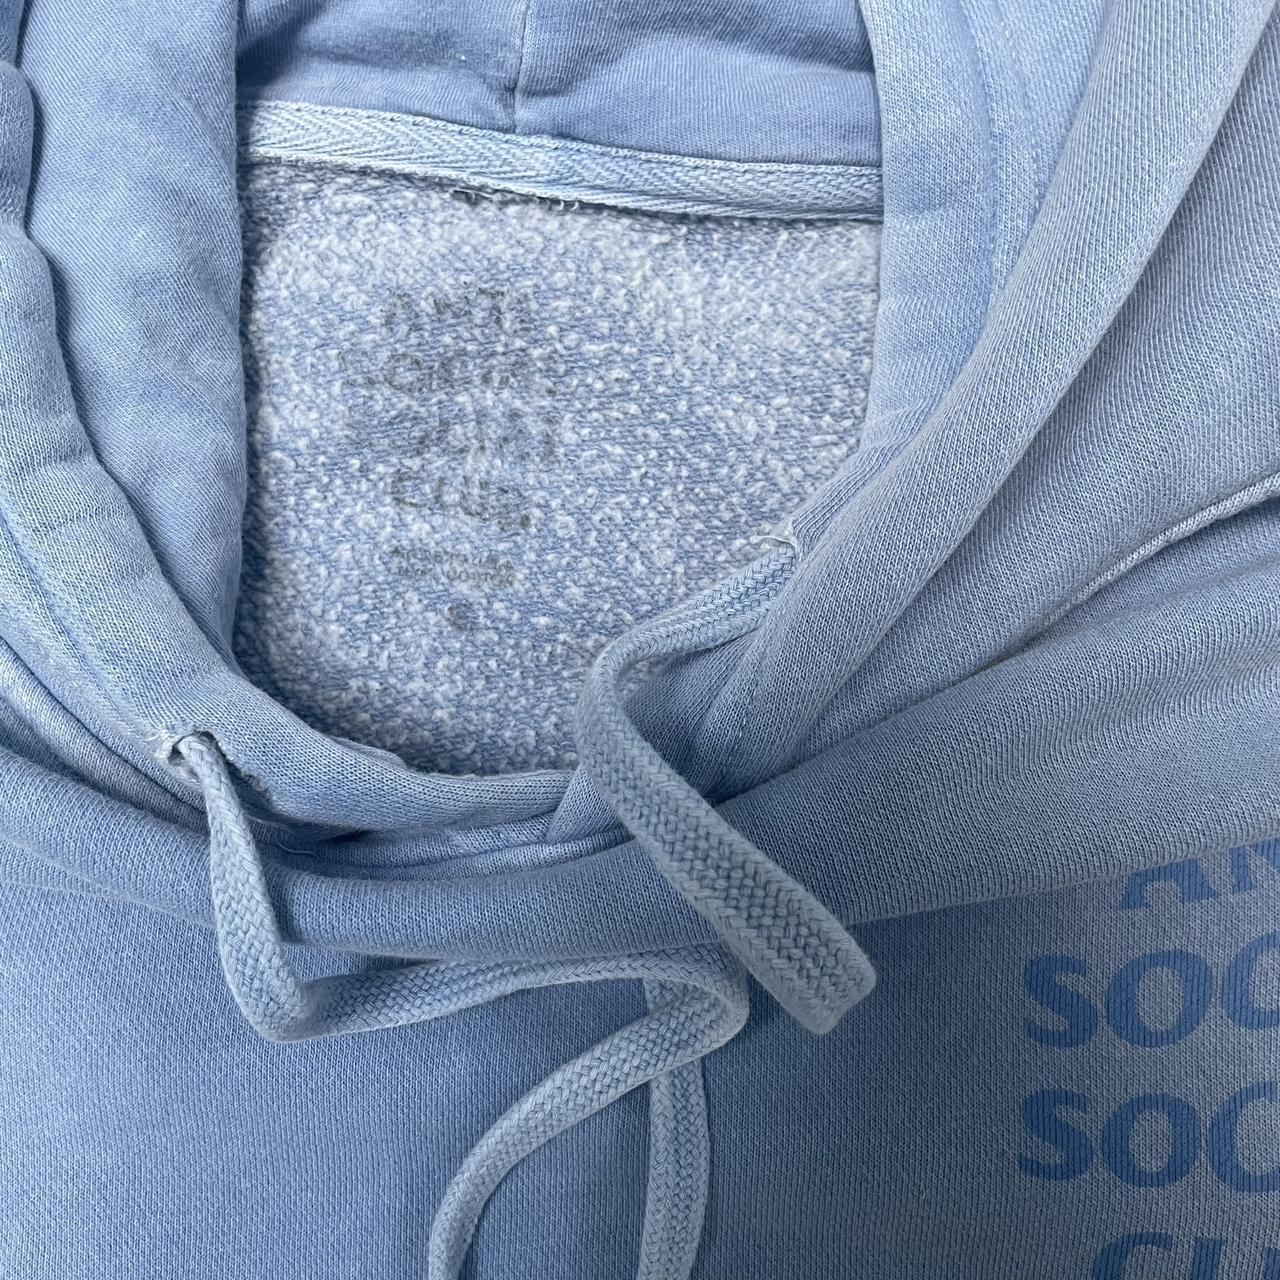 Ghosted Light Blue Hoodie